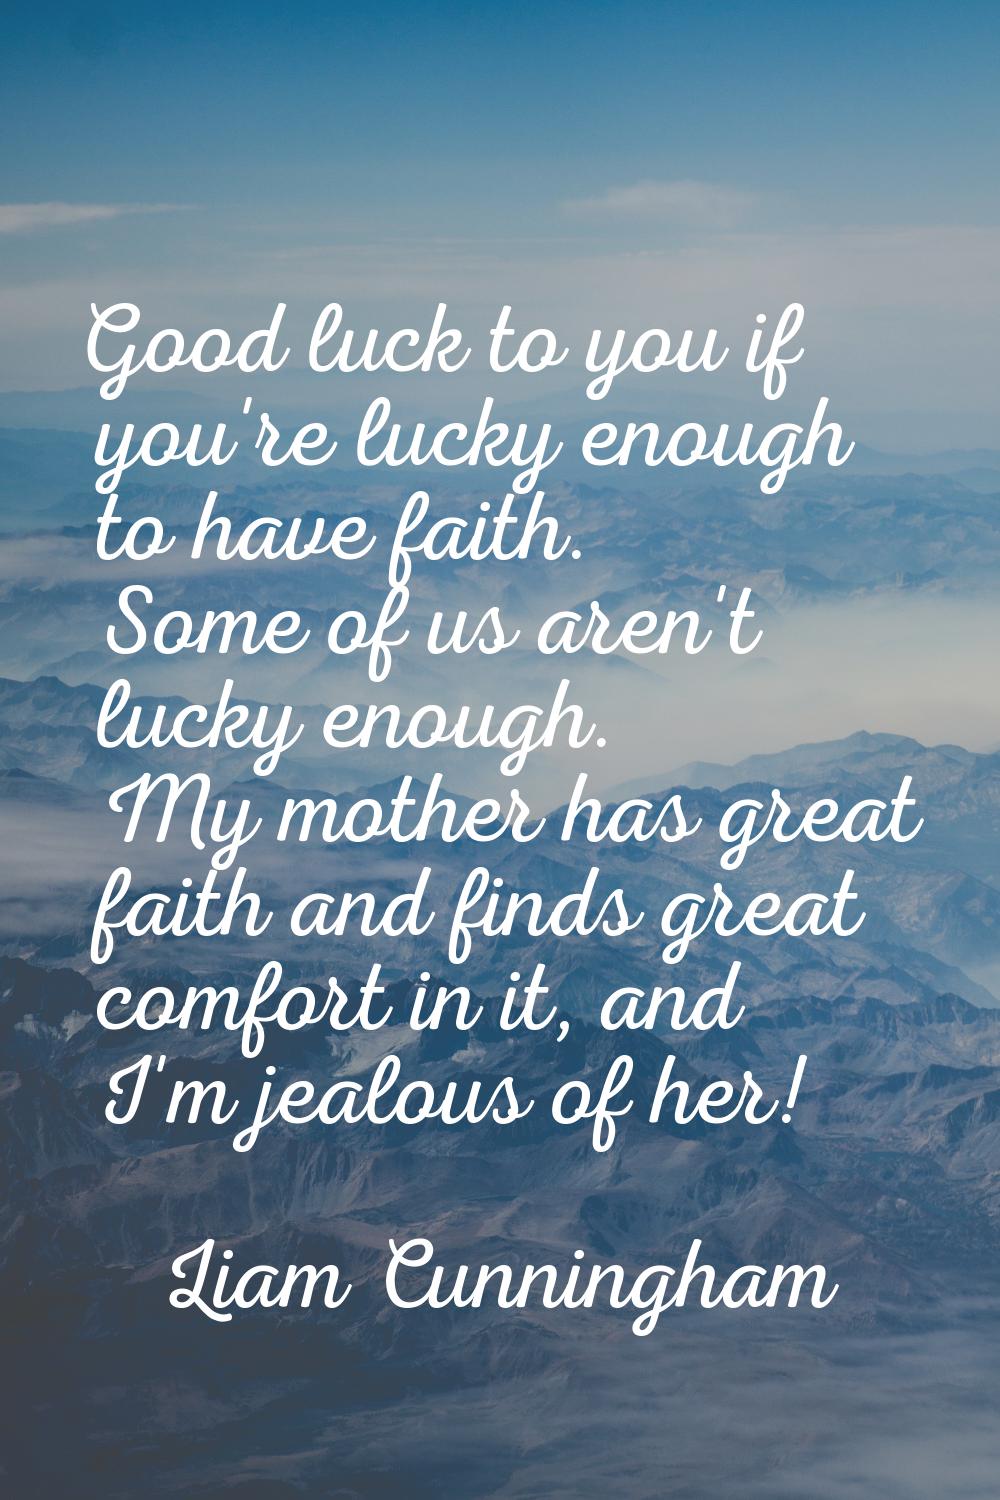 Good luck to you if you're lucky enough to have faith. Some of us aren't lucky enough. My mother ha